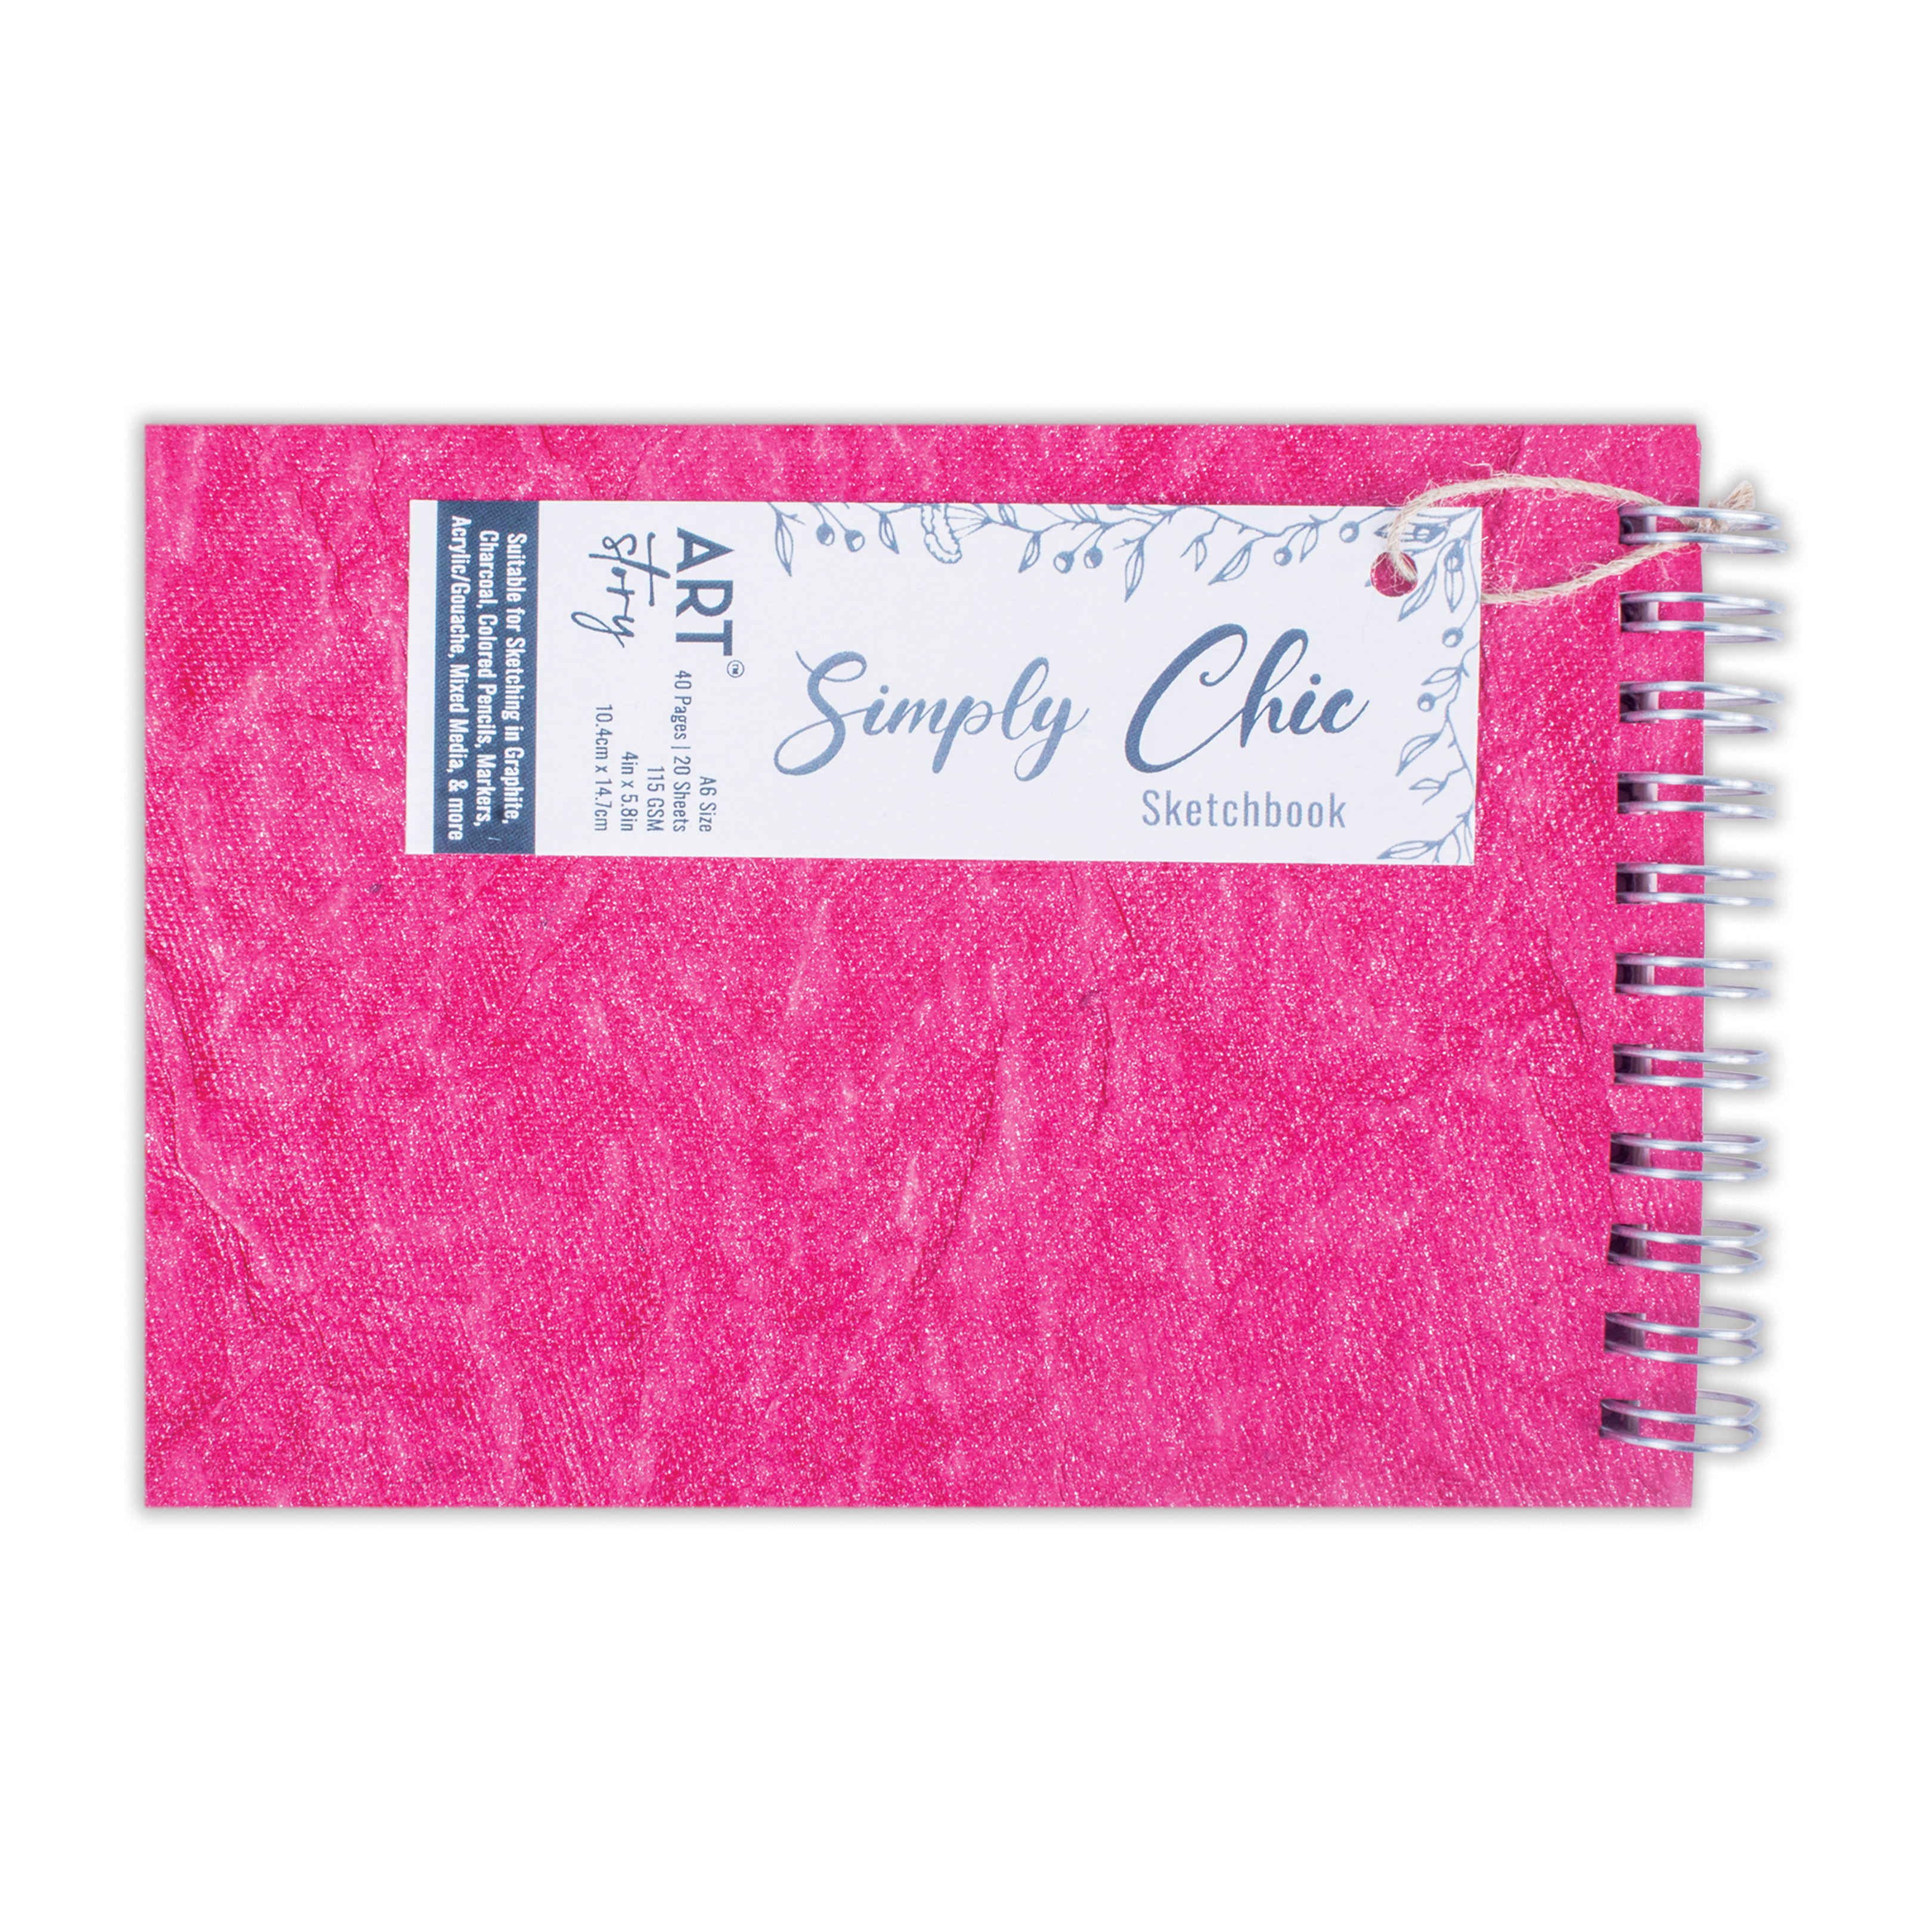 Simply Chic Spiral Bound Sketchbook with Leather Paper Cover | Fuchsia Pink | A6- 115gsm - 40Pages - 1Book